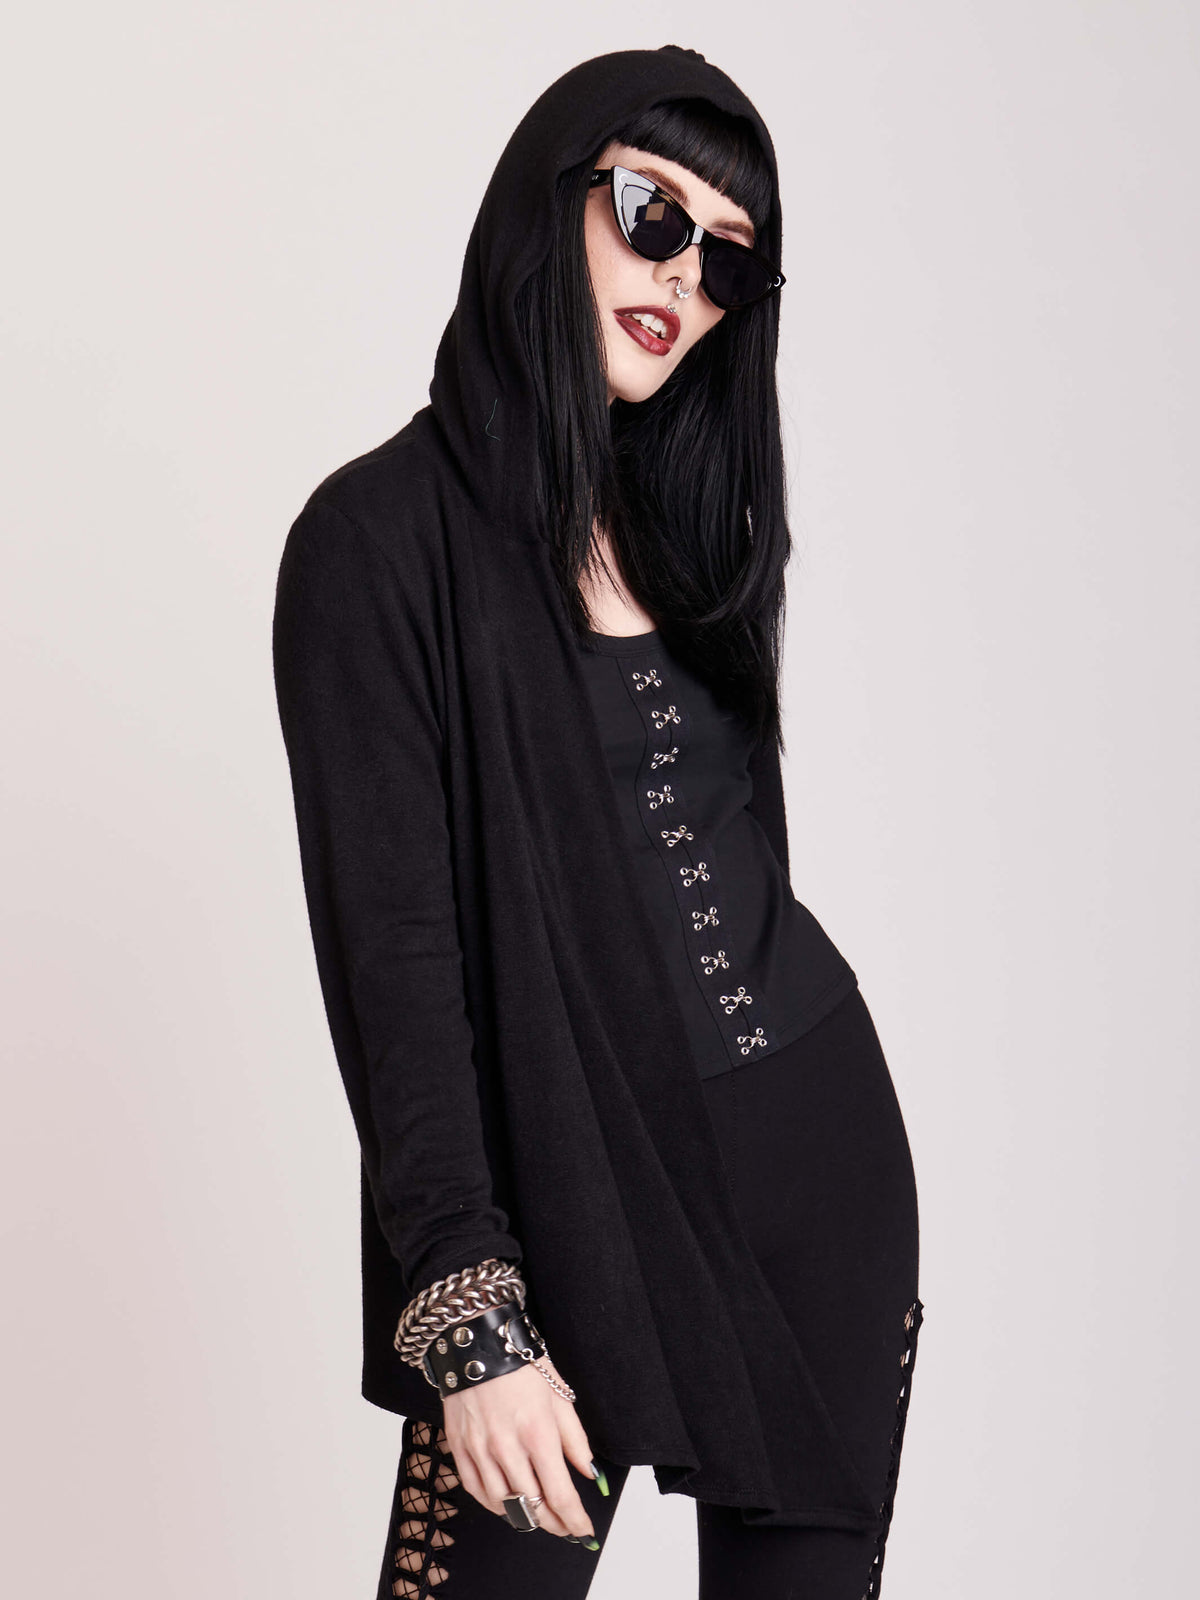 Super soft and supple lightweight hooded sweater cardigan, with embroidered moon phase back detail.